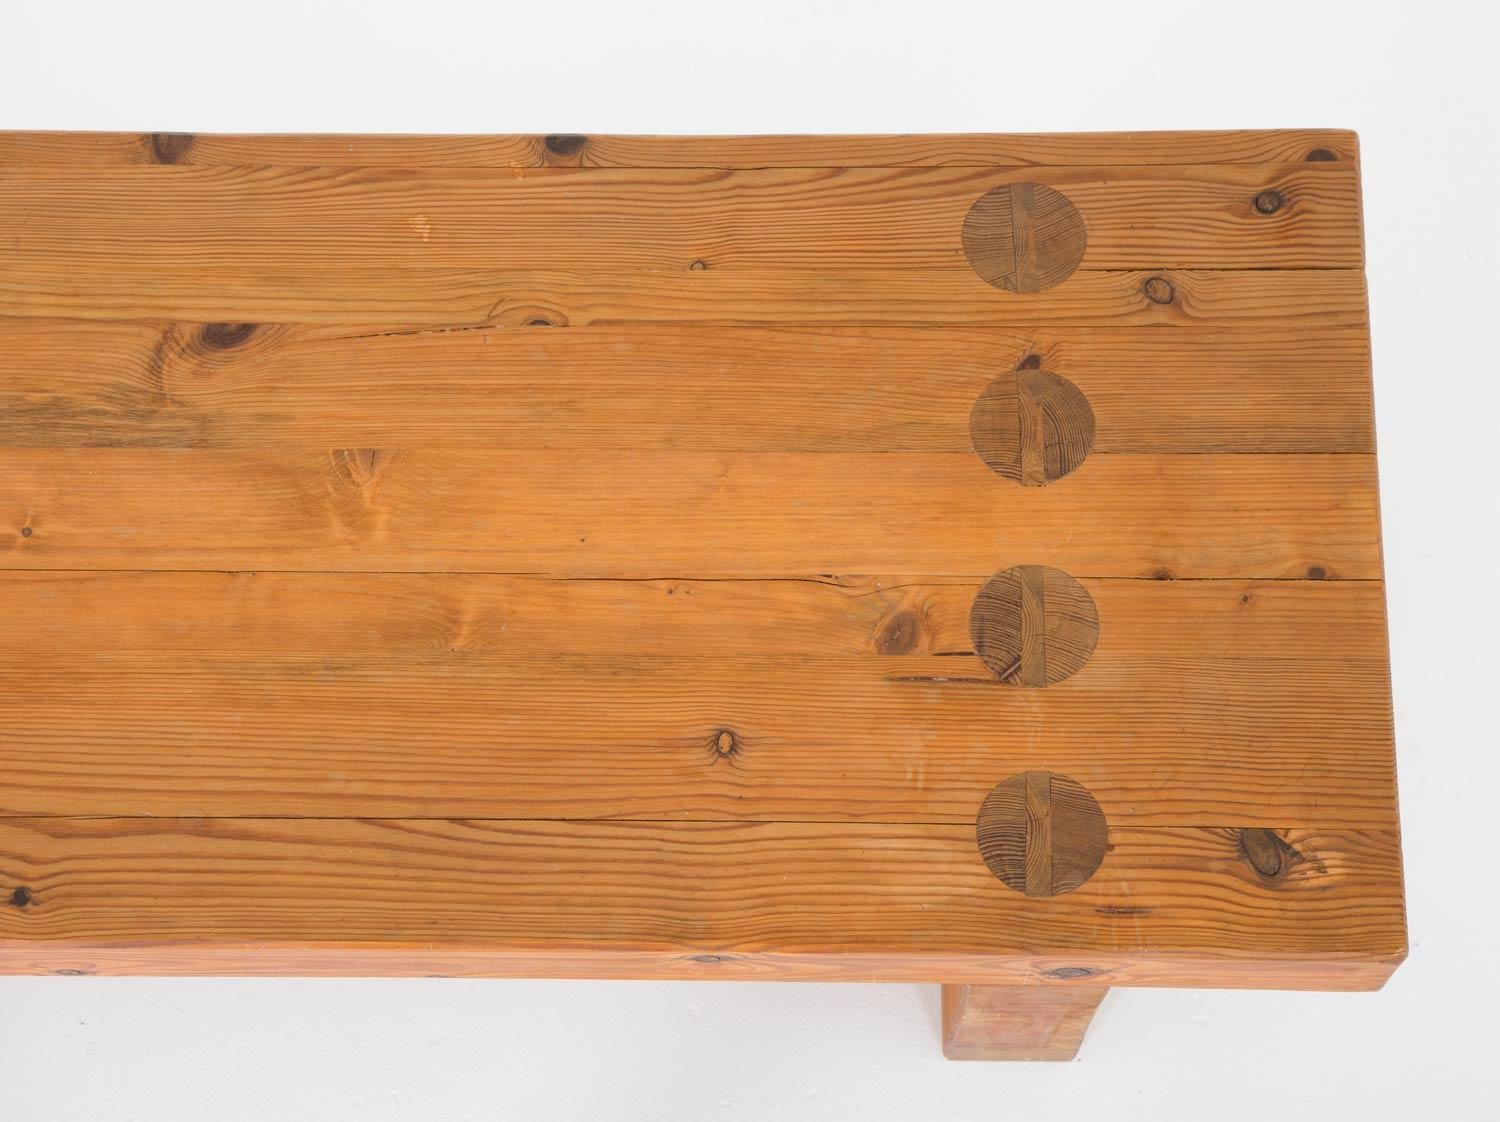 Mid-Century Modern Swedish Bench in Pine by Sven Larsson For Sale